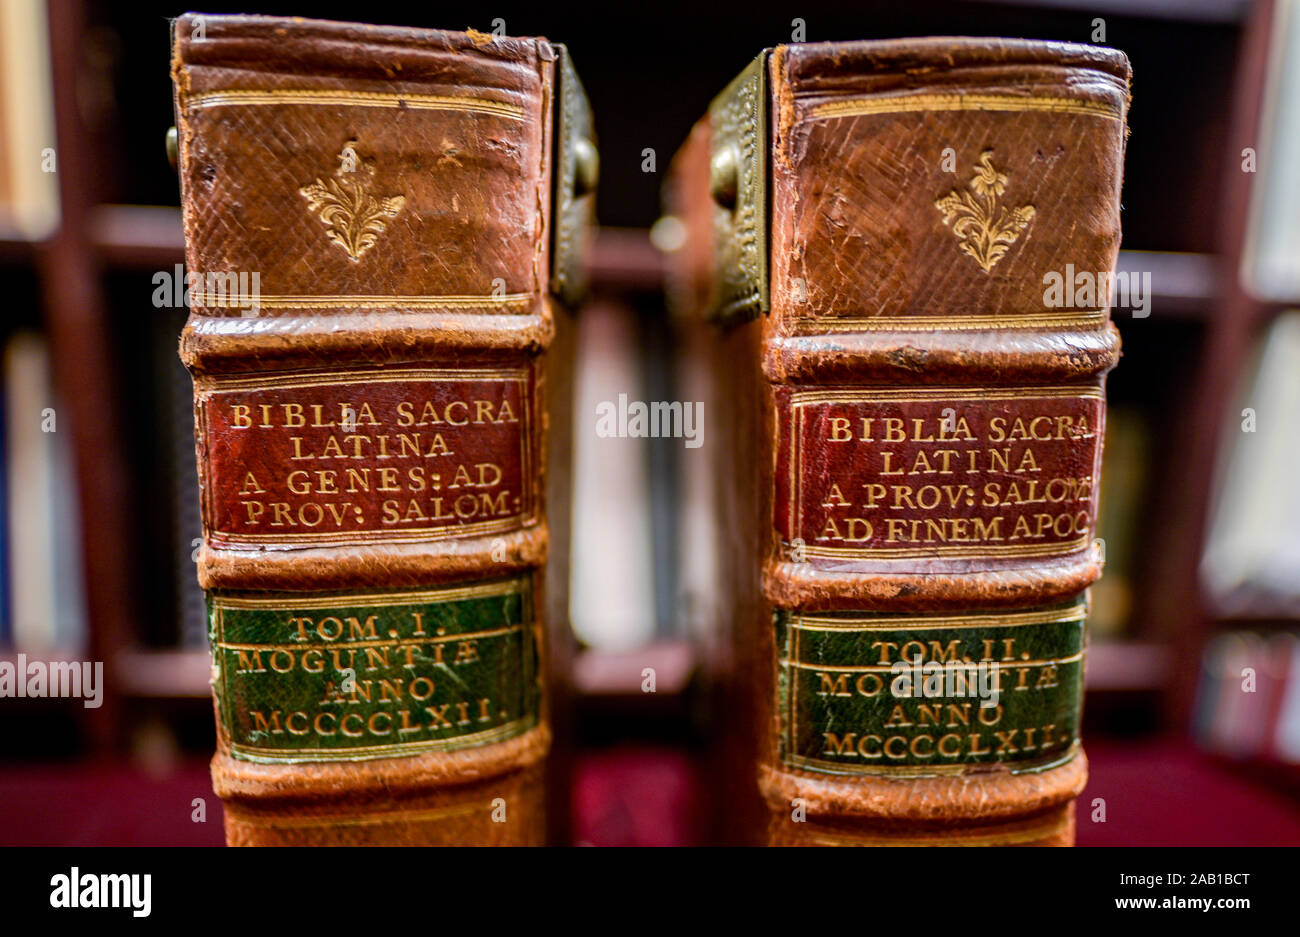 Hamburg, Germany. 19th Nov, 2019. The two volumes of a Bible from Gutenberg's printing press, which are auctioned off in an anniversary auction of valuable books, are on red velvet at Ketterer Kunst, a Hamburg art auction house. The Biblia latina from 1462 by Johannes Fust and Peter Schöffer, the direct successors of Johannes Gutenberg, is worth one million euros and has a circulation of 75 copies. Credit: Axel Heimken/dpa/Alamy Live News Stock Photo